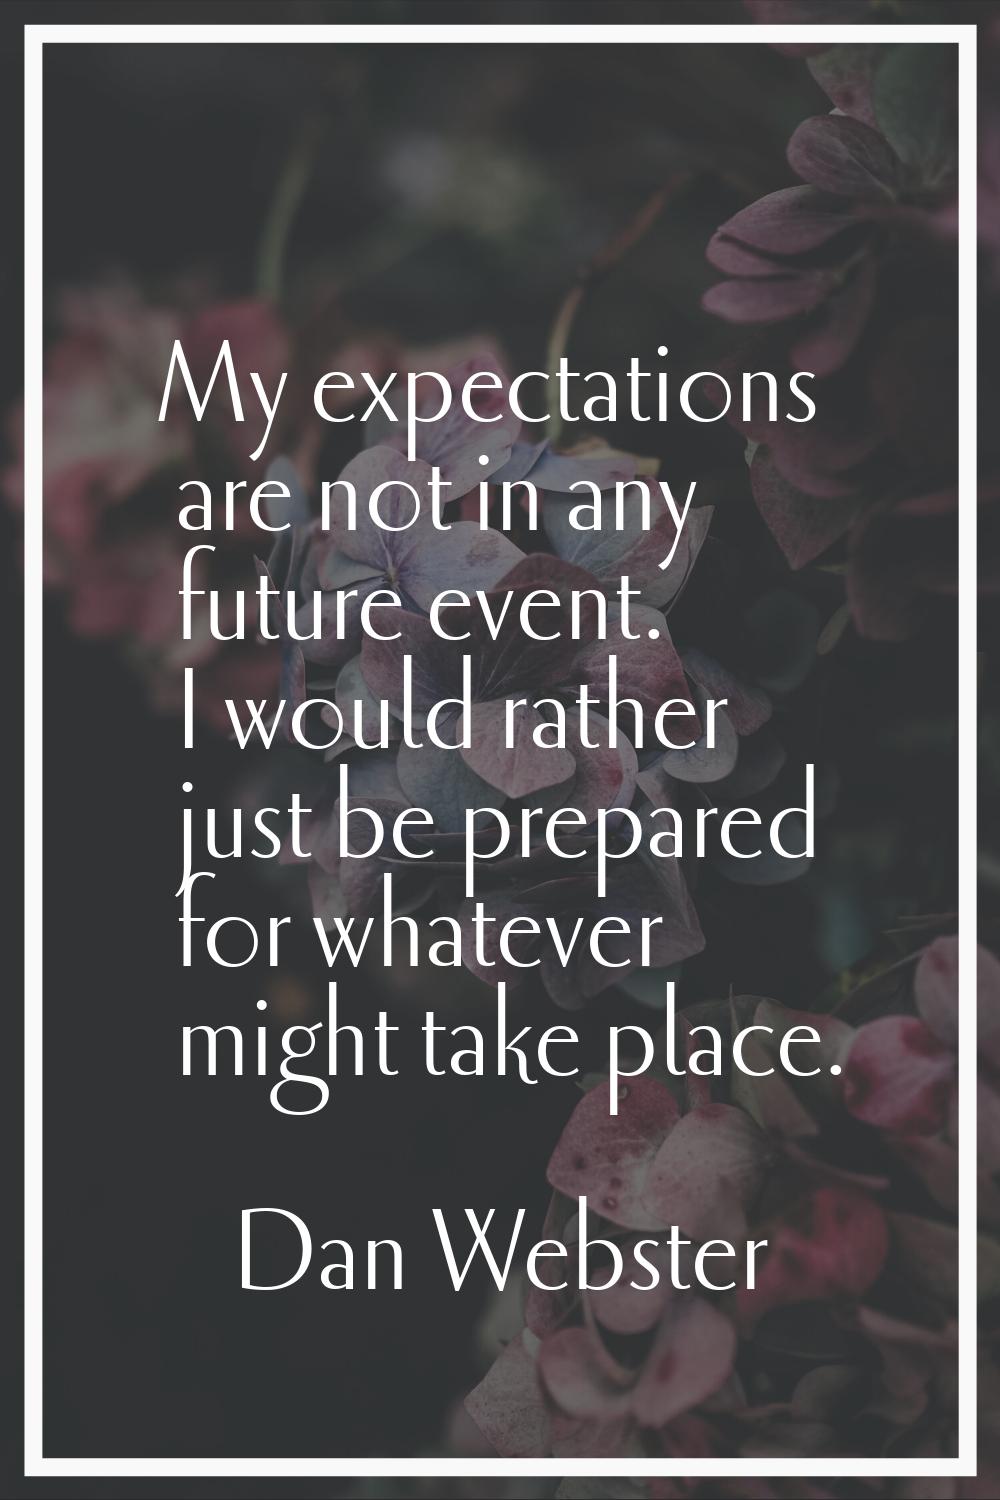 My expectations are not in any future event. I would rather just be prepared for whatever might tak